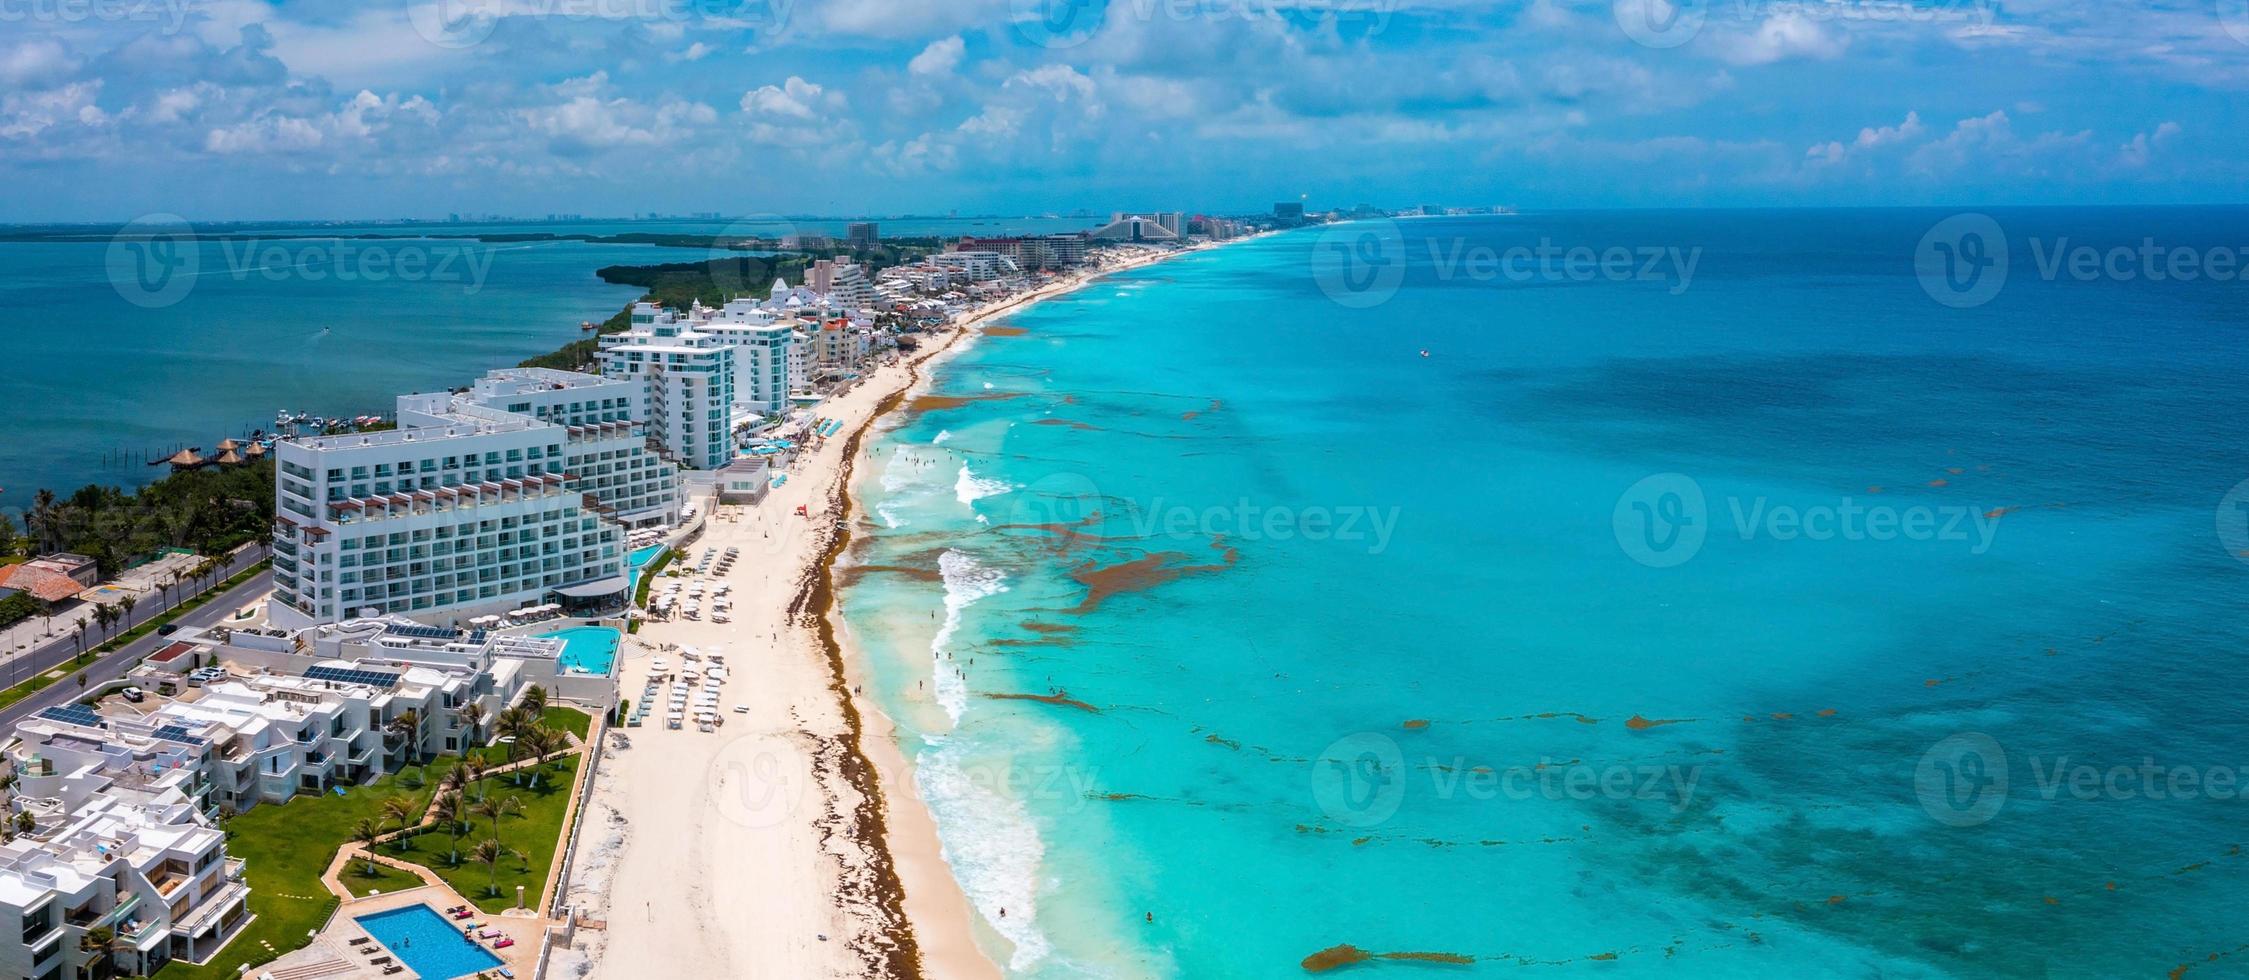 Flying over beautiful Cancun beach area. photo